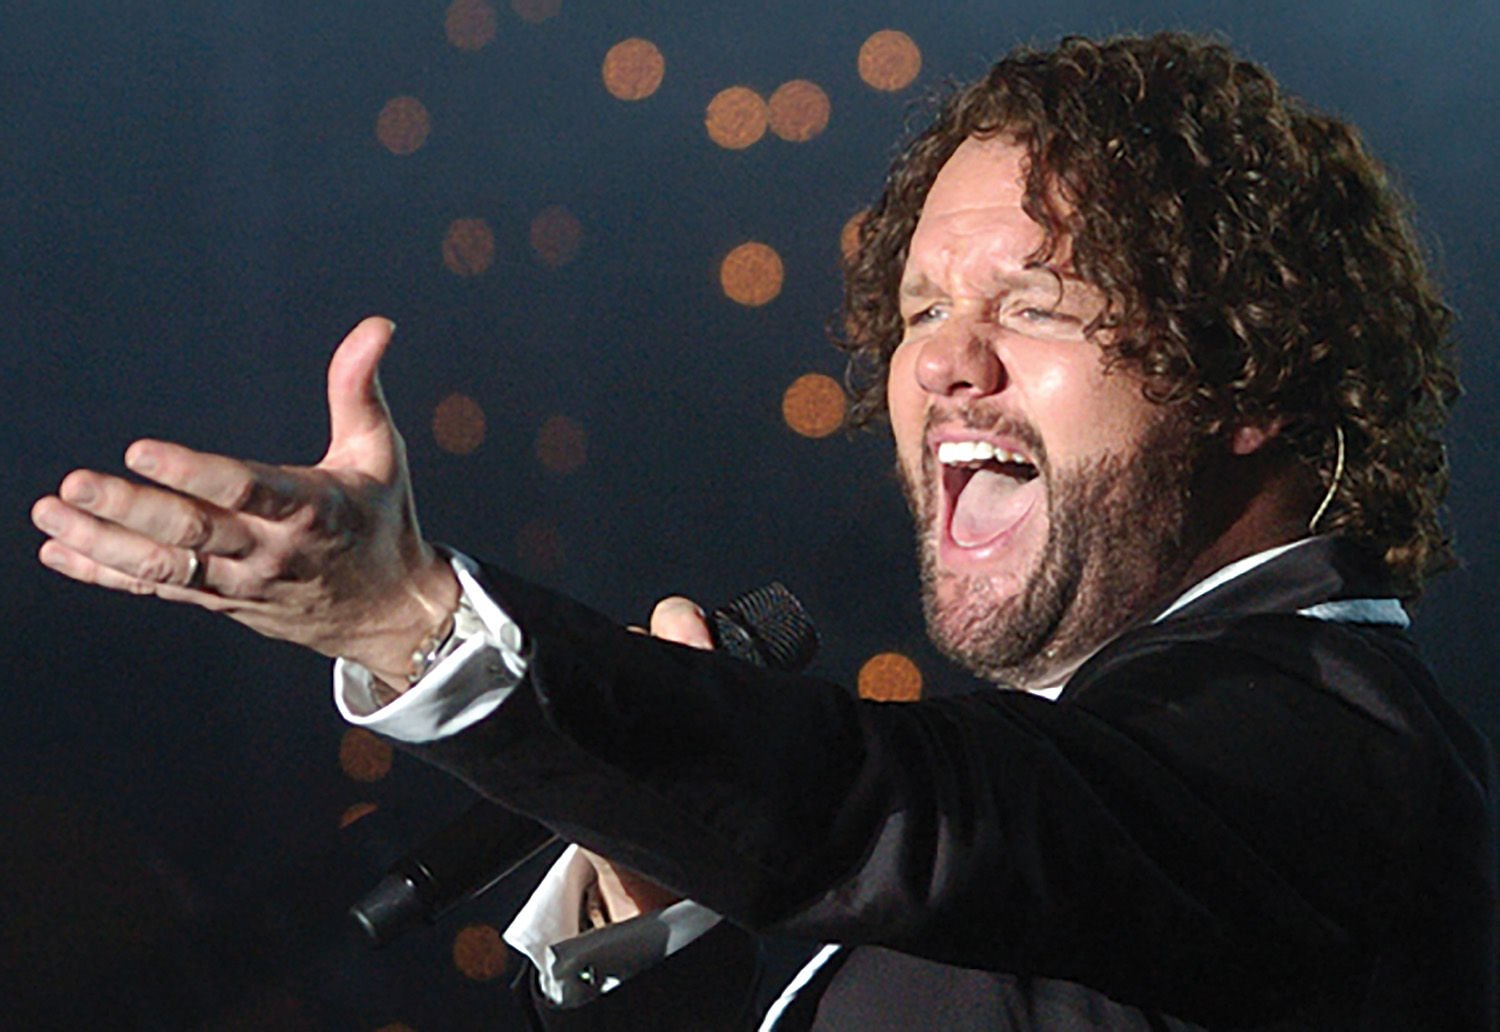 David Phelps to open Christmas tour in Florence Nov. 13 Local News